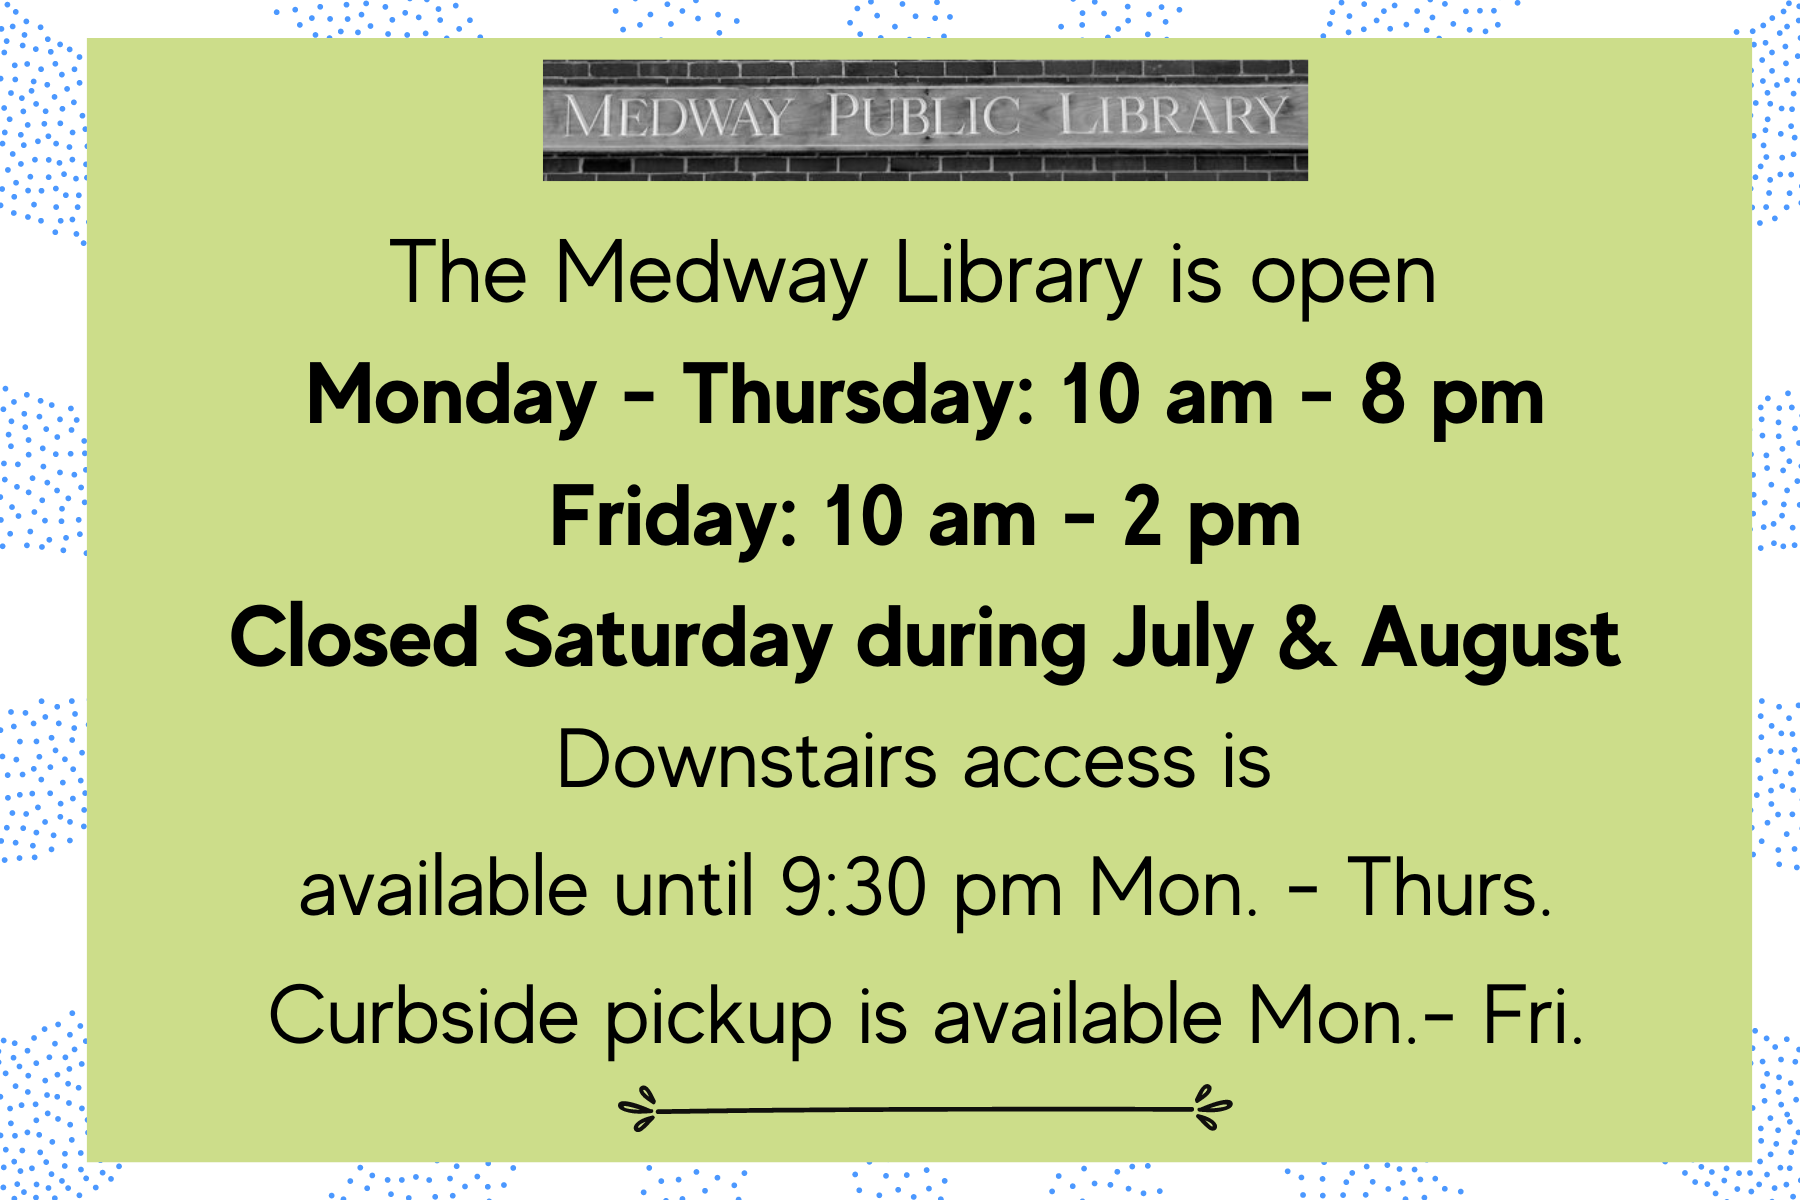 The Medway Library is open  Monday - Thursday: 10 am - 8 pm Friday: 10 am - 2 pm. Closed Saturday during July & August. Downstairs access is  available until 9:30 pm Mon. - Thurs. Curbside pickup is available Mon.- Fri.